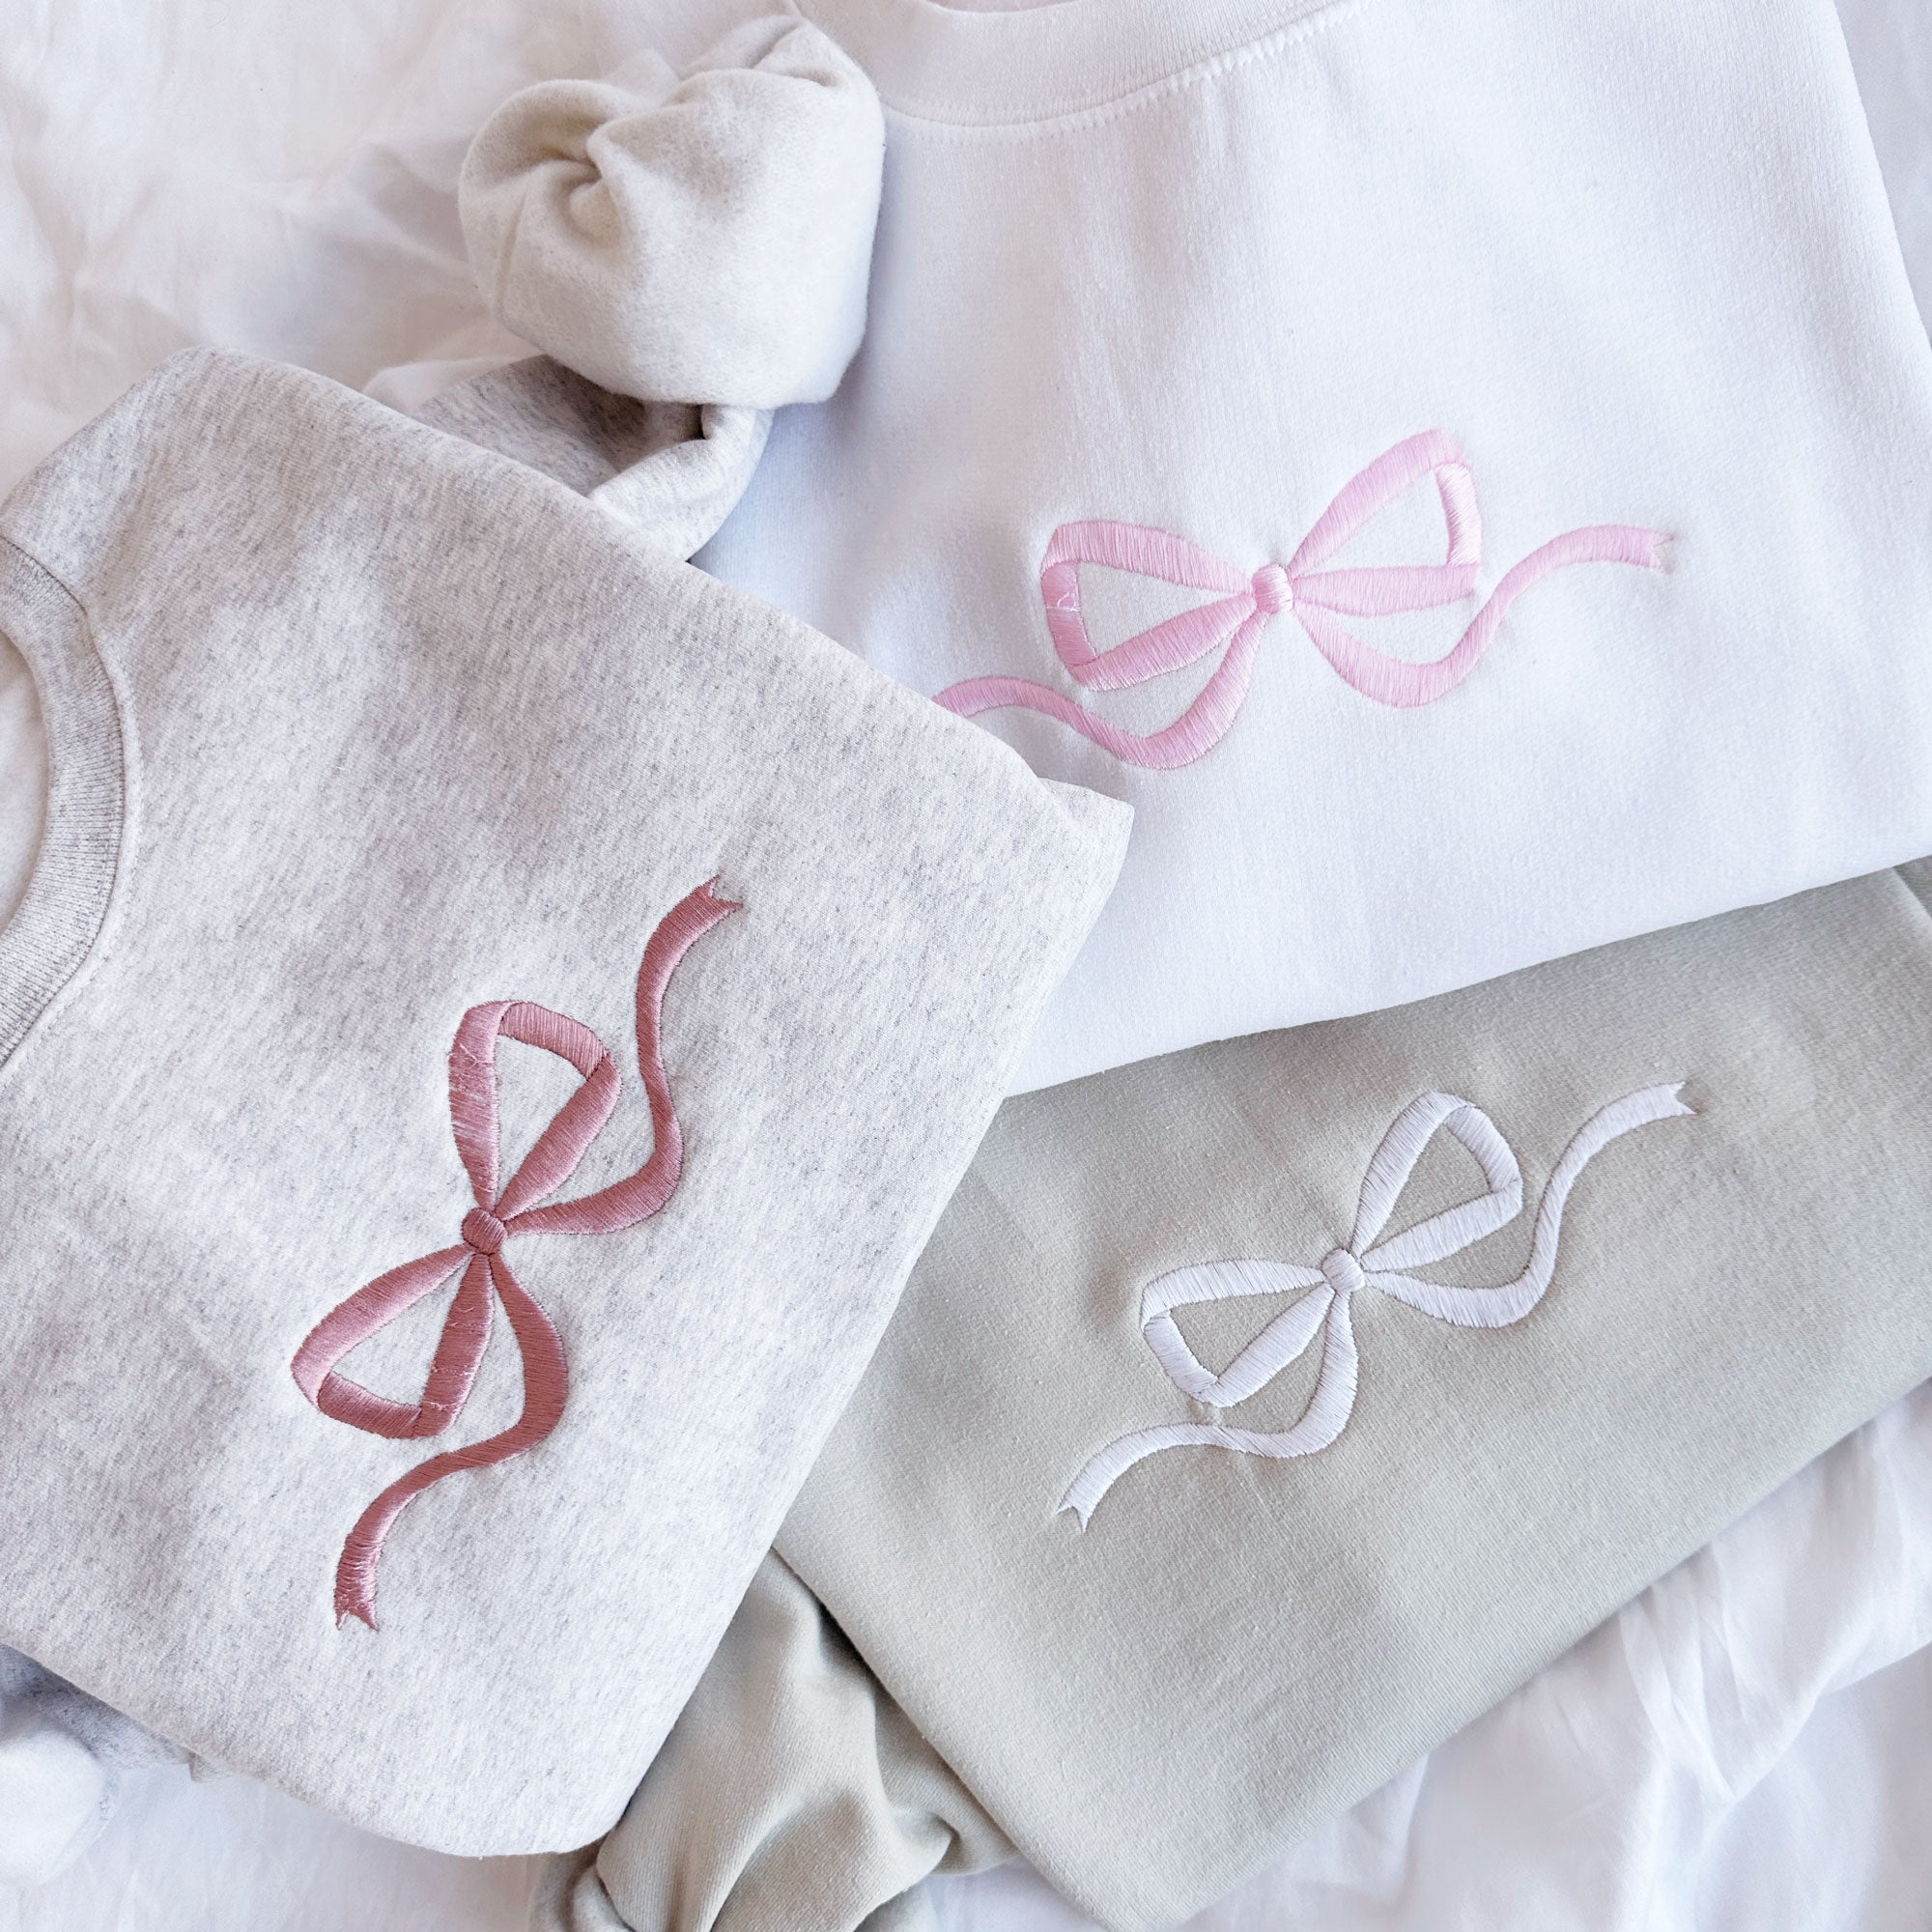 heather oat sweatshirt with mauve bow embroidered, white sweatshirt with baby pink bow, sand sweatshirt with white bow